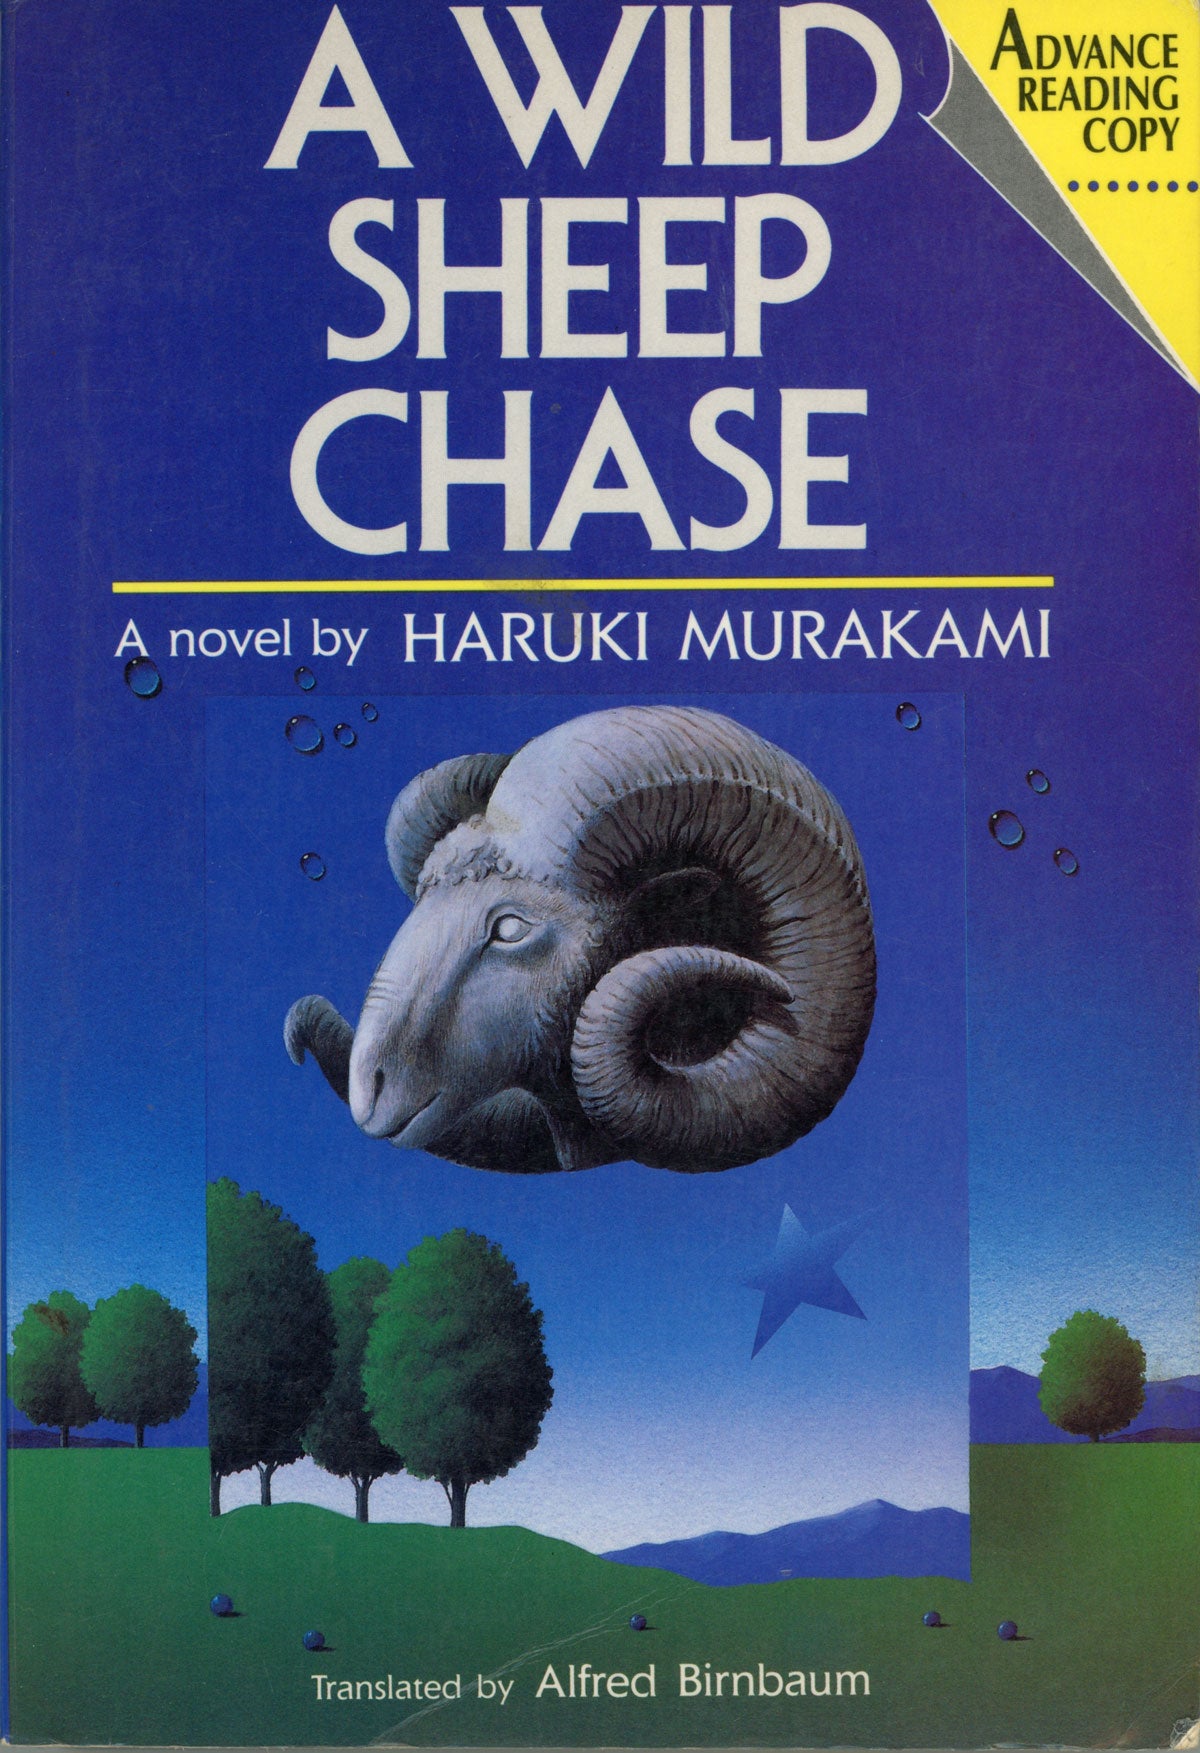 in　the　...　Advance　Alfred　edition　first　Birnbaum　of　English　reading　Translated　Murakami　Haruki　by　CHASE　SHEEP　WILD　A　copy